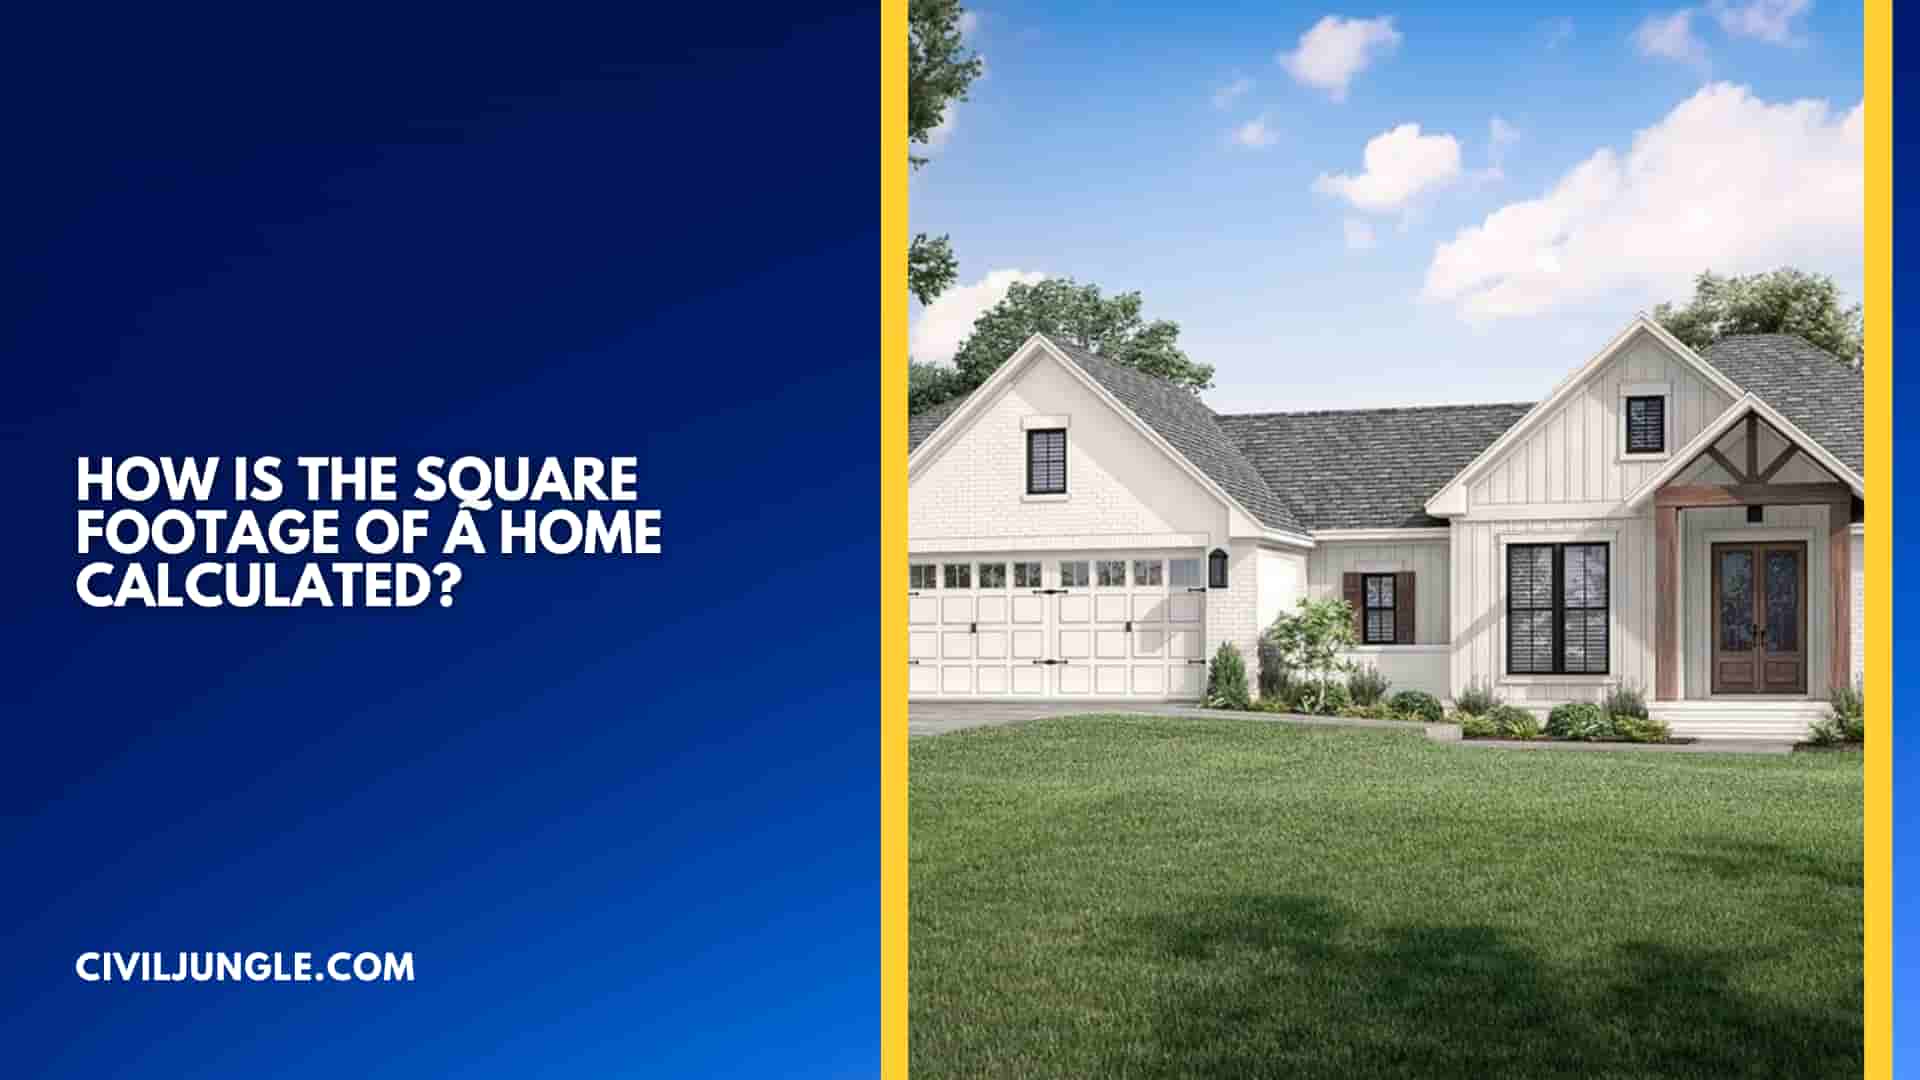 How Is the Square Footage of a Home Calculated?